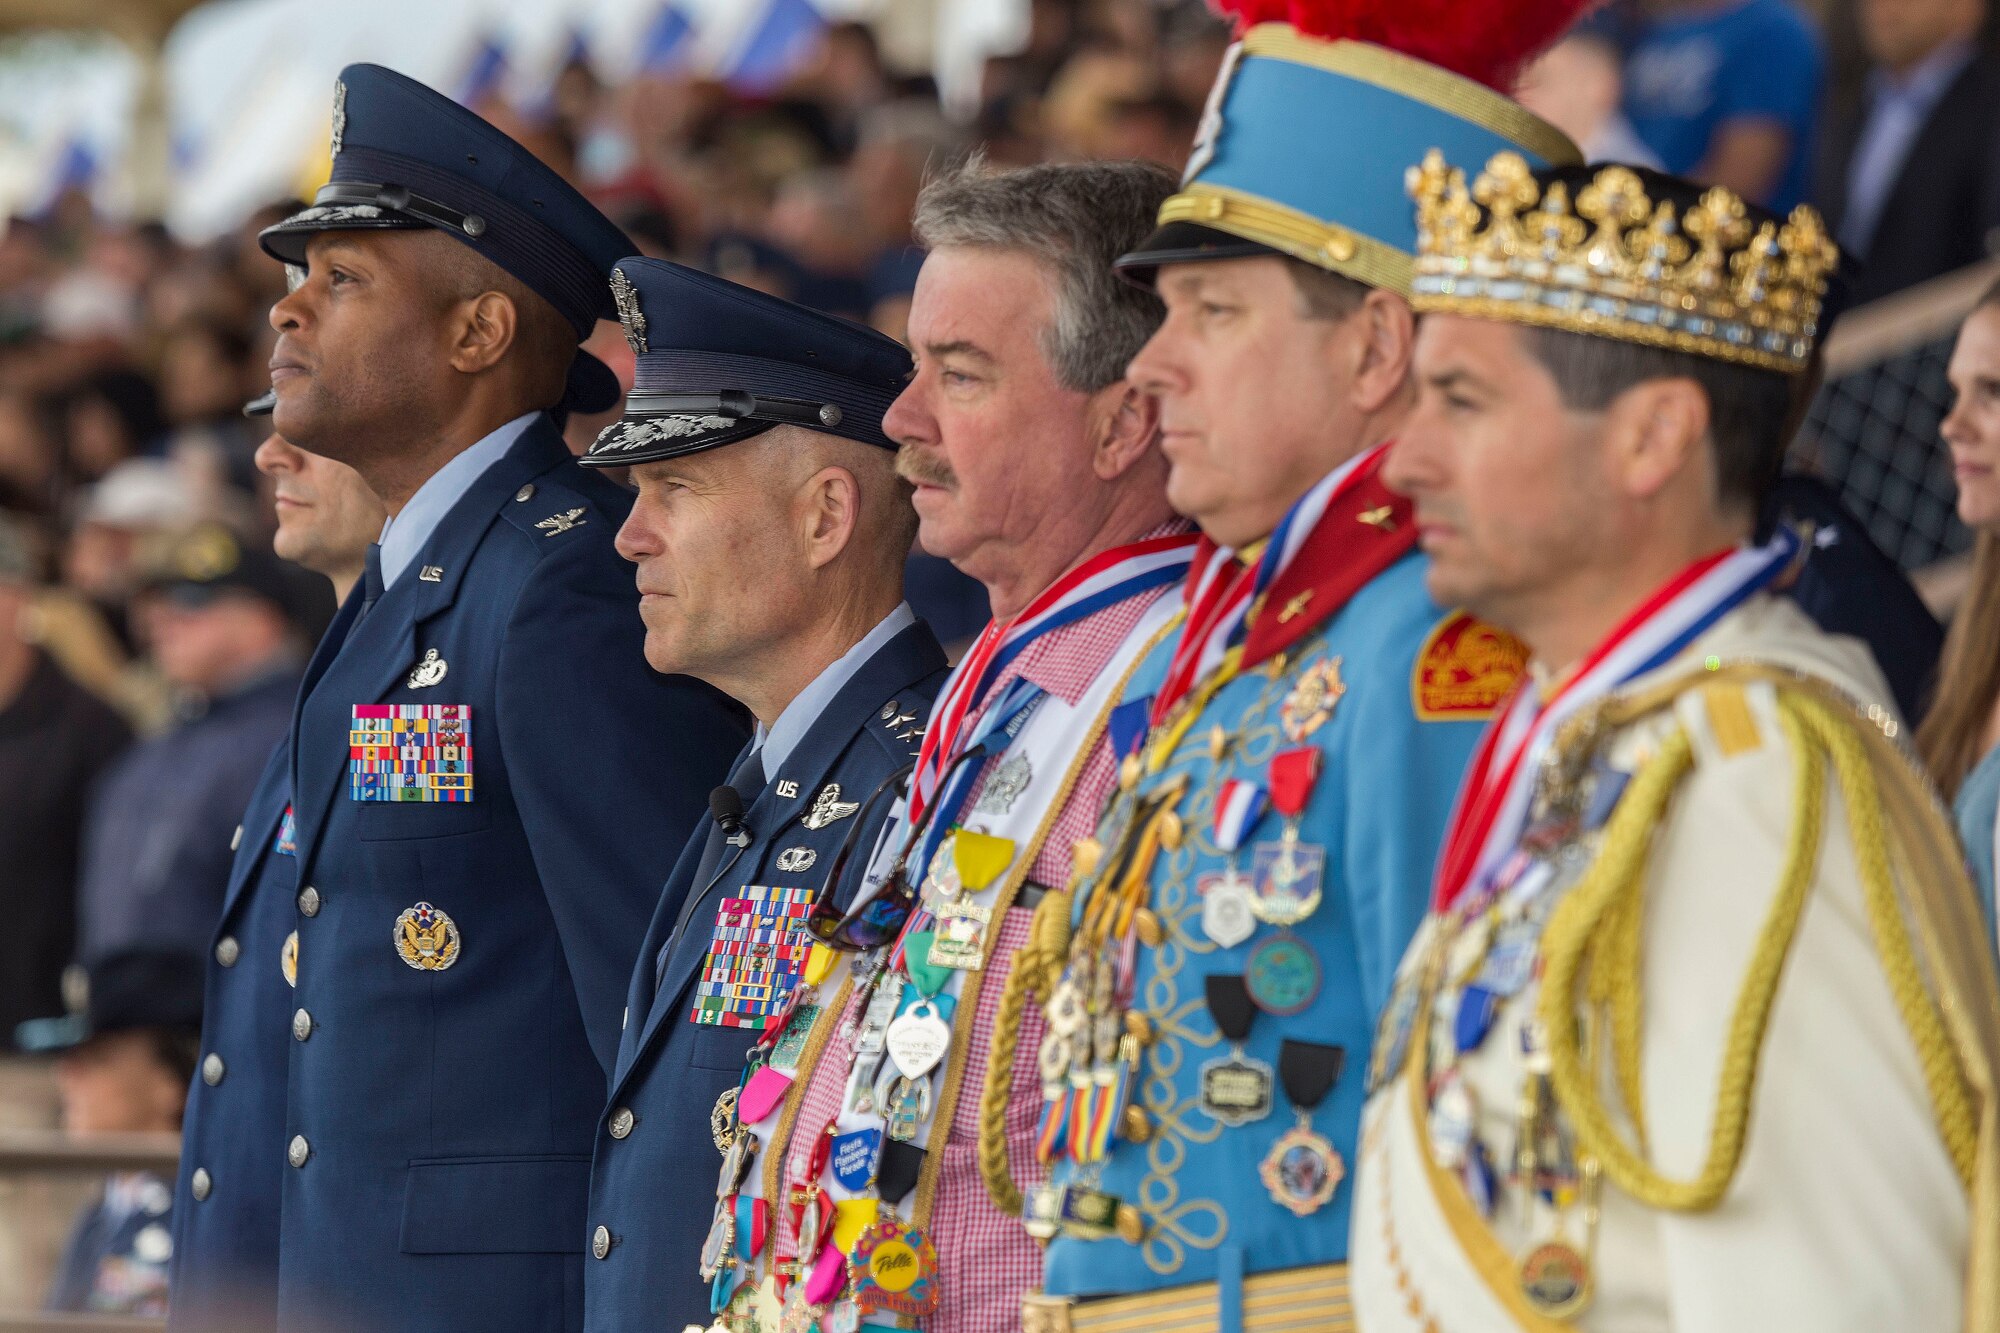 Military and civilian personnel stand at Joint Base San Antonio-Lackland, Texas during a Basic military training graduation ceremony April 20, 2018. The ceremony also acknowledged the beginning of “Fiesta San Antonio,” the city’s annual festival held to honor the memory of the battles of the Alamo and San Jacinto. (U.S. Air Force photo by Ismael Ortega / Released)